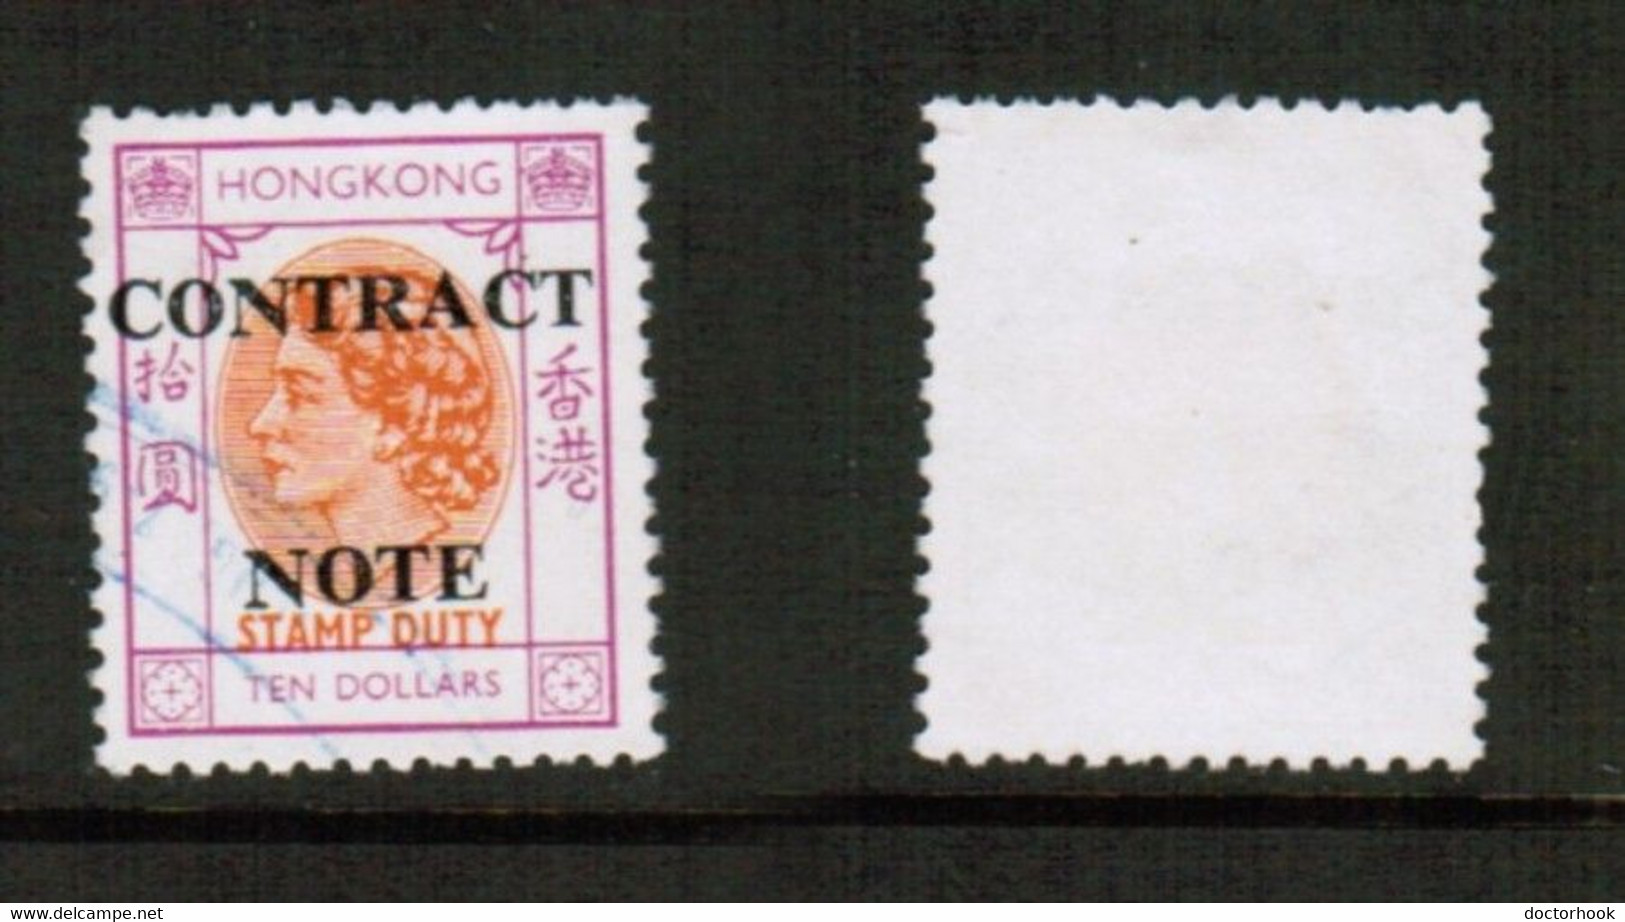 HONG KONG   $10.00 DOLLAR CONTRACT NOTE FISCAL USED (CONDITION AS PER SCAN) (Stamp Scan # 828-17) - Post-fiscaal Zegels